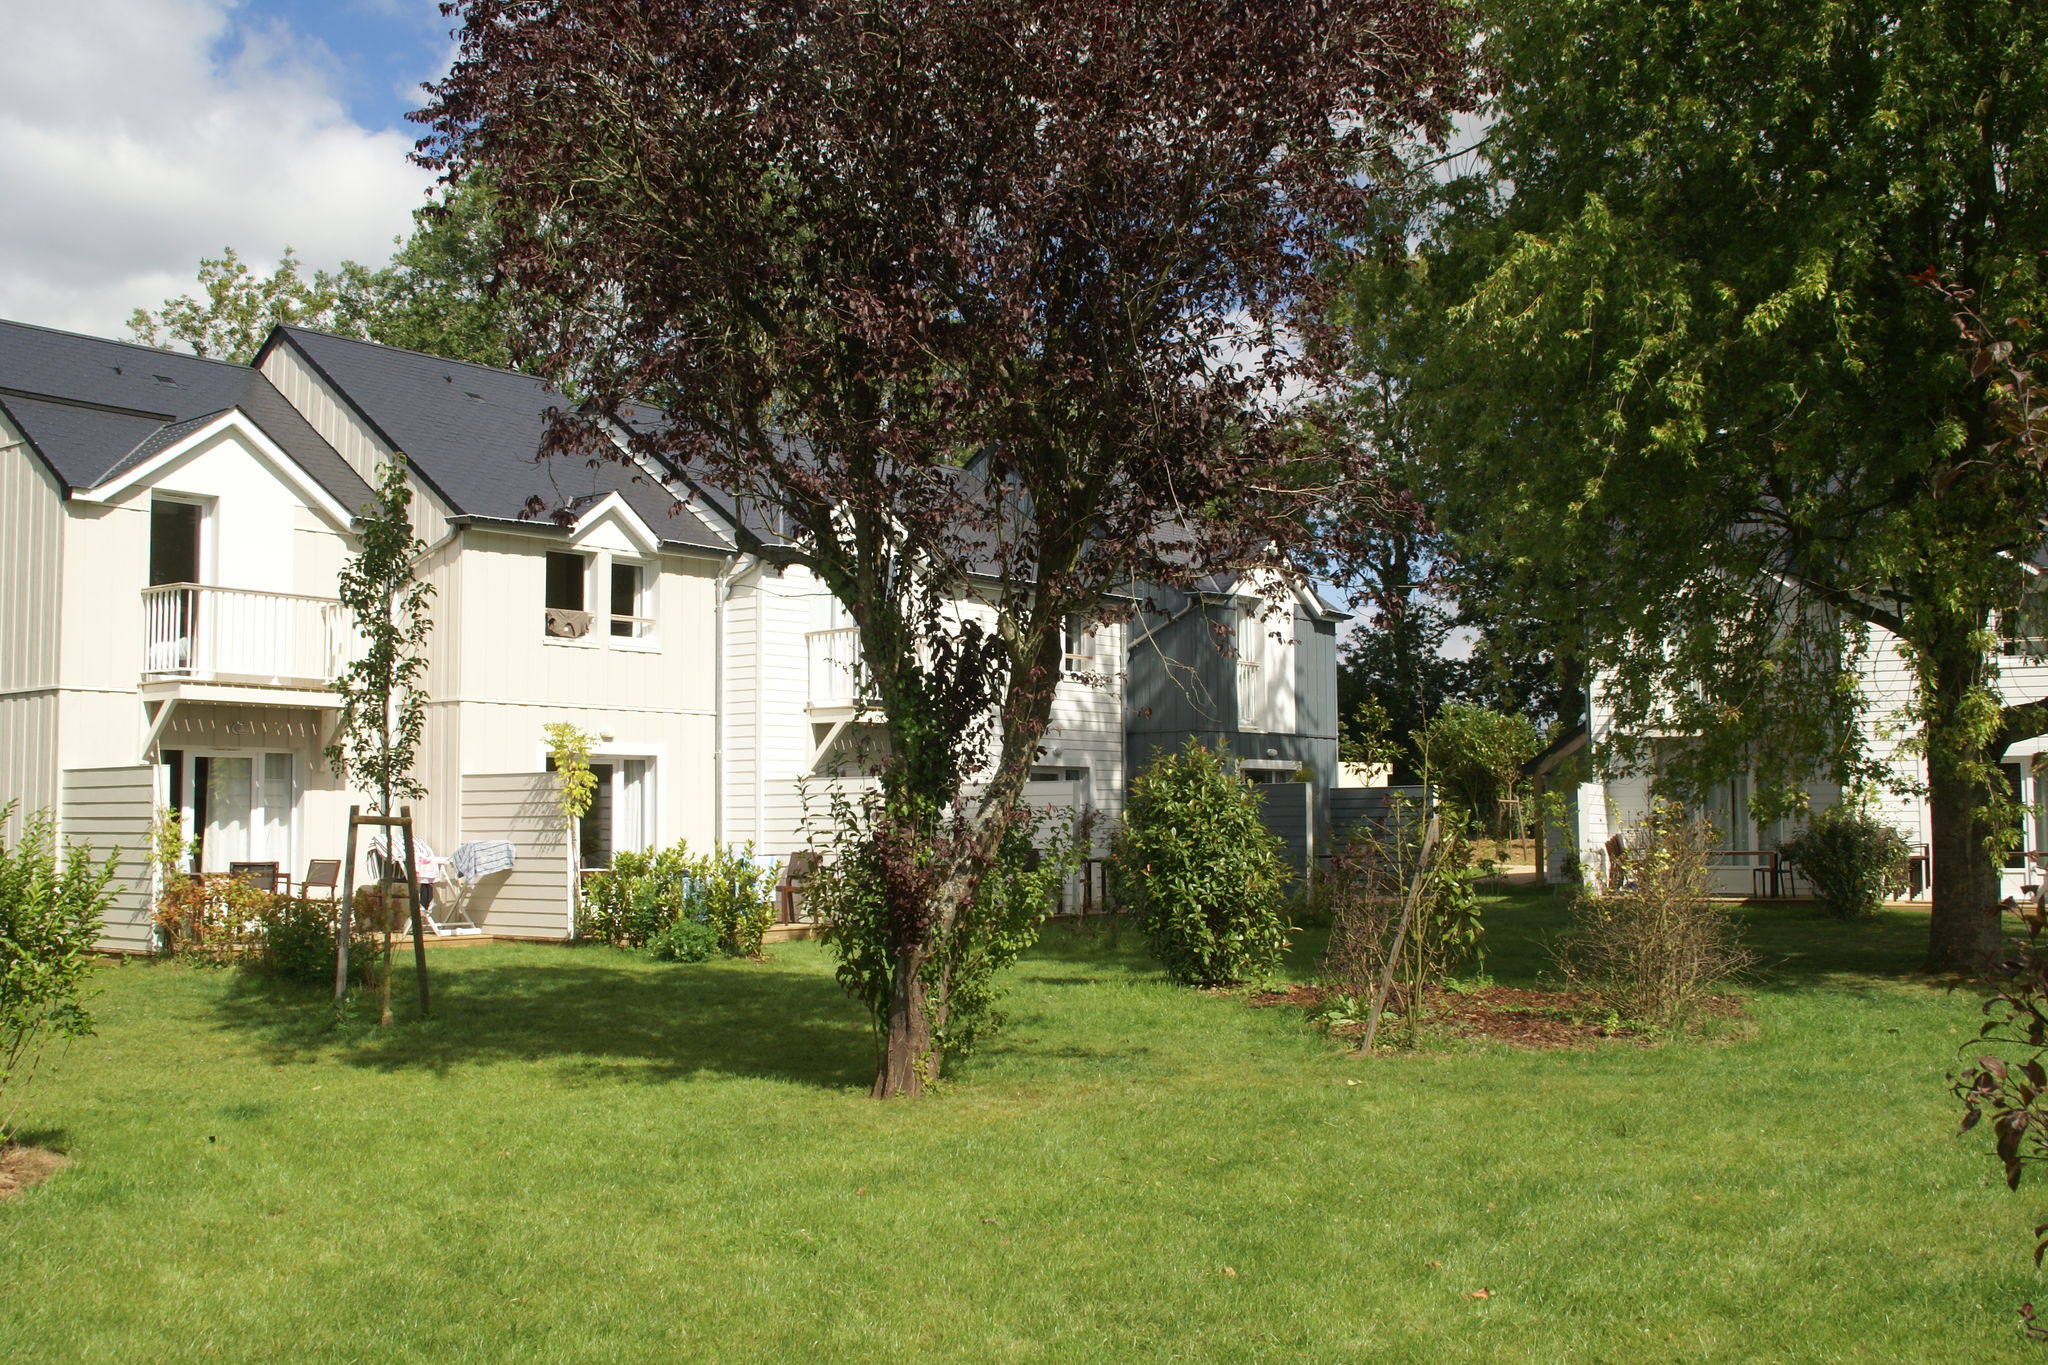 Modern apartment near Deauville, Honfleur and Cabourg